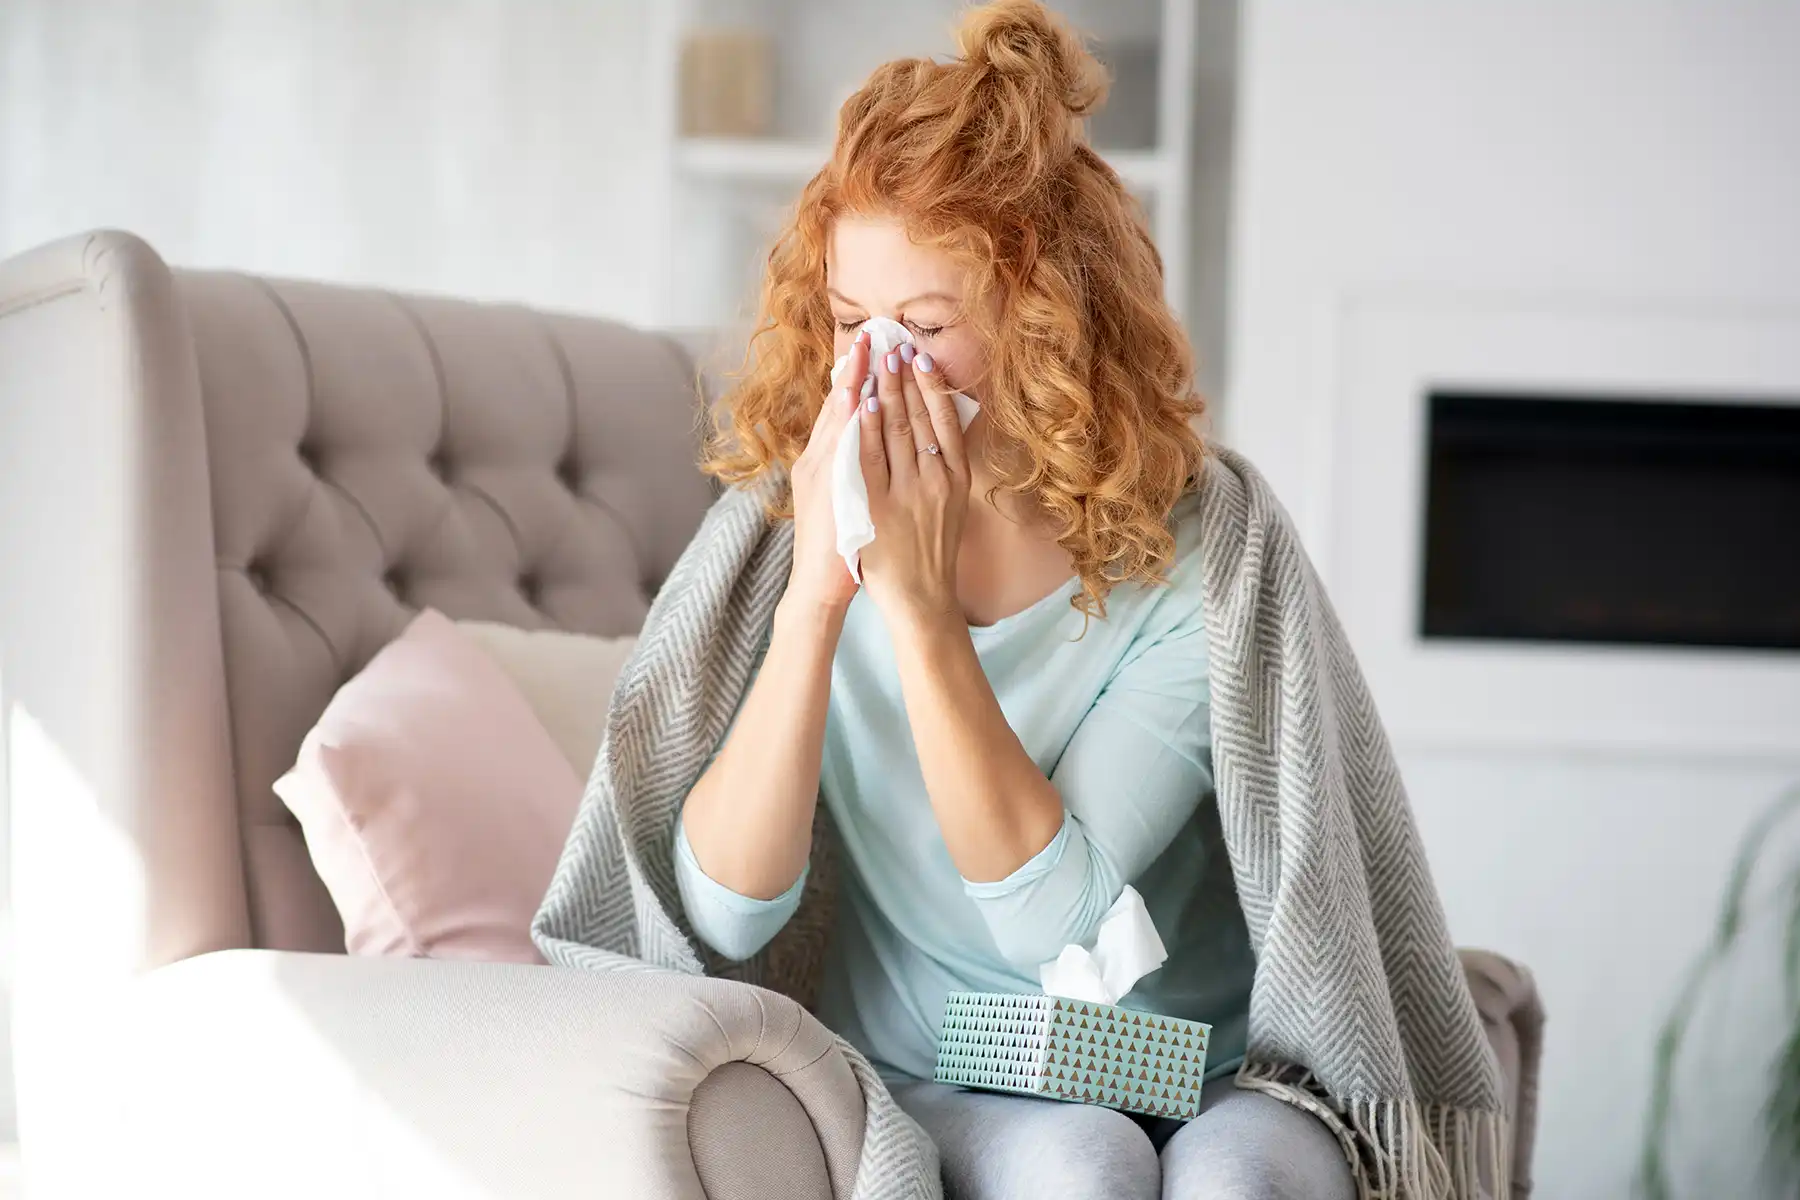 Women sitting on her couch covered in a blanket and blowing her nose.